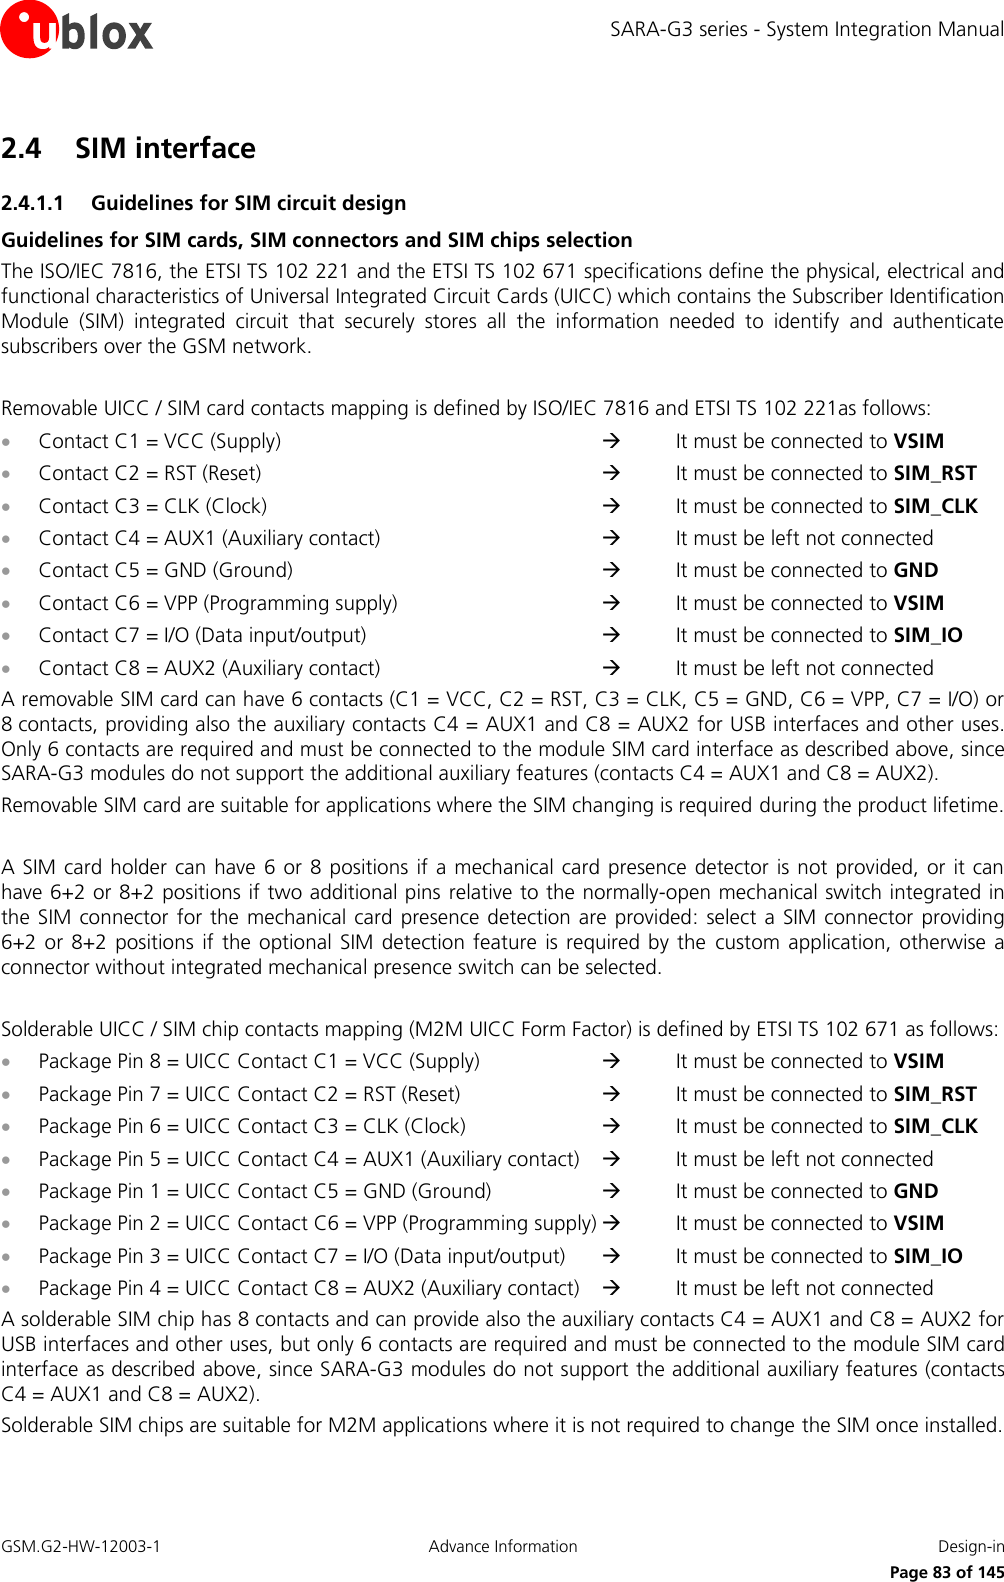 SARA-G3 series - System Integration Manual GSM.G2-HW-12003-1  Advance Information  Design-in     Page 83 of 145 2.4 SIM interface 2.4.1.1 Guidelines for SIM circuit design Guidelines for SIM cards, SIM connectors and SIM chips selection The ISO/IEC 7816, the ETSI TS 102 221 and the ETSI TS 102 671 specifications define the physical, electrical and functional characteristics of Universal Integrated Circuit Cards (UICC) which contains the Subscriber Identification Module  (SIM)  integrated  circuit  that  securely  stores  all  the  information  needed  to  identify  and  authenticate subscribers over the GSM network.  Removable UICC / SIM card contacts mapping is defined by ISO/IEC 7816 and ETSI TS 102 221as follows:  Contact C1 = VCC (Supply)              It must be connected to VSIM  Contact C2 = RST (Reset)              It must be connected to SIM_RST  Contact C3 = CLK (Clock)              It must be connected to SIM_CLK  Contact C4 = AUX1 (Auxiliary contact)         It must be left not connected  Contact C5 = GND (Ground)            It must be connected to GND  Contact C6 = VPP (Programming supply)         It must be connected to VSIM  Contact C7 = I/O (Data input/output)          It must be connected to SIM_IO  Contact C8 = AUX2 (Auxiliary contact)         It must be left not connected A removable SIM card can have 6 contacts (C1 = VCC, C2 = RST, C3 = CLK, C5 = GND, C6 = VPP, C7 = I/O) or 8 contacts, providing also the auxiliary contacts C4 = AUX1 and C8 = AUX2 for USB interfaces and other uses. Only 6 contacts are required and must be connected to the module SIM card interface as described above, since SARA-G3 modules do not support the additional auxiliary features (contacts C4 = AUX1 and C8 = AUX2). Removable SIM card are suitable for applications where the SIM changing is required during the product lifetime.  A SIM card holder  can have  6  or  8 positions  if  a mechanical  card presence  detector is not  provided, or  it  can have 6+2 or 8+2 positions if two additional pins  relative to the normally-open mechanical switch integrated in the SIM  connector  for  the mechanical card  presence  detection are provided:  select a  SIM  connector  providing 6+2 or  8+2  positions  if  the  optional  SIM  detection  feature  is required  by  the  custom  application,  otherwise  a connector without integrated mechanical presence switch can be selected.  Solderable UICC / SIM chip contacts mapping (M2M UICC Form Factor) is defined by ETSI TS 102 671 as follows:  Package Pin 8 = UICC Contact C1 = VCC (Supply)        It must be connected to VSIM  Package Pin 7 = UICC Contact C2 = RST (Reset)        It must be connected to SIM_RST  Package Pin 6 = UICC Contact C3 = CLK (Clock)        It must be connected to SIM_CLK  Package Pin 5 = UICC Contact C4 = AUX1 (Auxiliary contact)      It must be left not connected  Package Pin 1 = UICC Contact C5 = GND (Ground)       It must be connected to GND  Package Pin 2 = UICC Contact C6 = VPP (Programming supply)   It must be connected to VSIM  Package Pin 3 = UICC Contact C7 = I/O (Data input/output)      It must be connected to SIM_IO  Package Pin 4 = UICC Contact C8 = AUX2 (Auxiliary contact)      It must be left not connected A solderable SIM chip has 8 contacts and can provide also the auxiliary contacts C4 = AUX1 and C8 = AUX2 for USB interfaces and other uses, but only 6 contacts are required and must be connected to the module SIM card interface as described above, since SARA-G3 modules do not support the additional auxiliary features (contacts C4 = AUX1 and C8 = AUX2). Solderable SIM chips are suitable for M2M applications where it is not required to change the SIM once installed. 